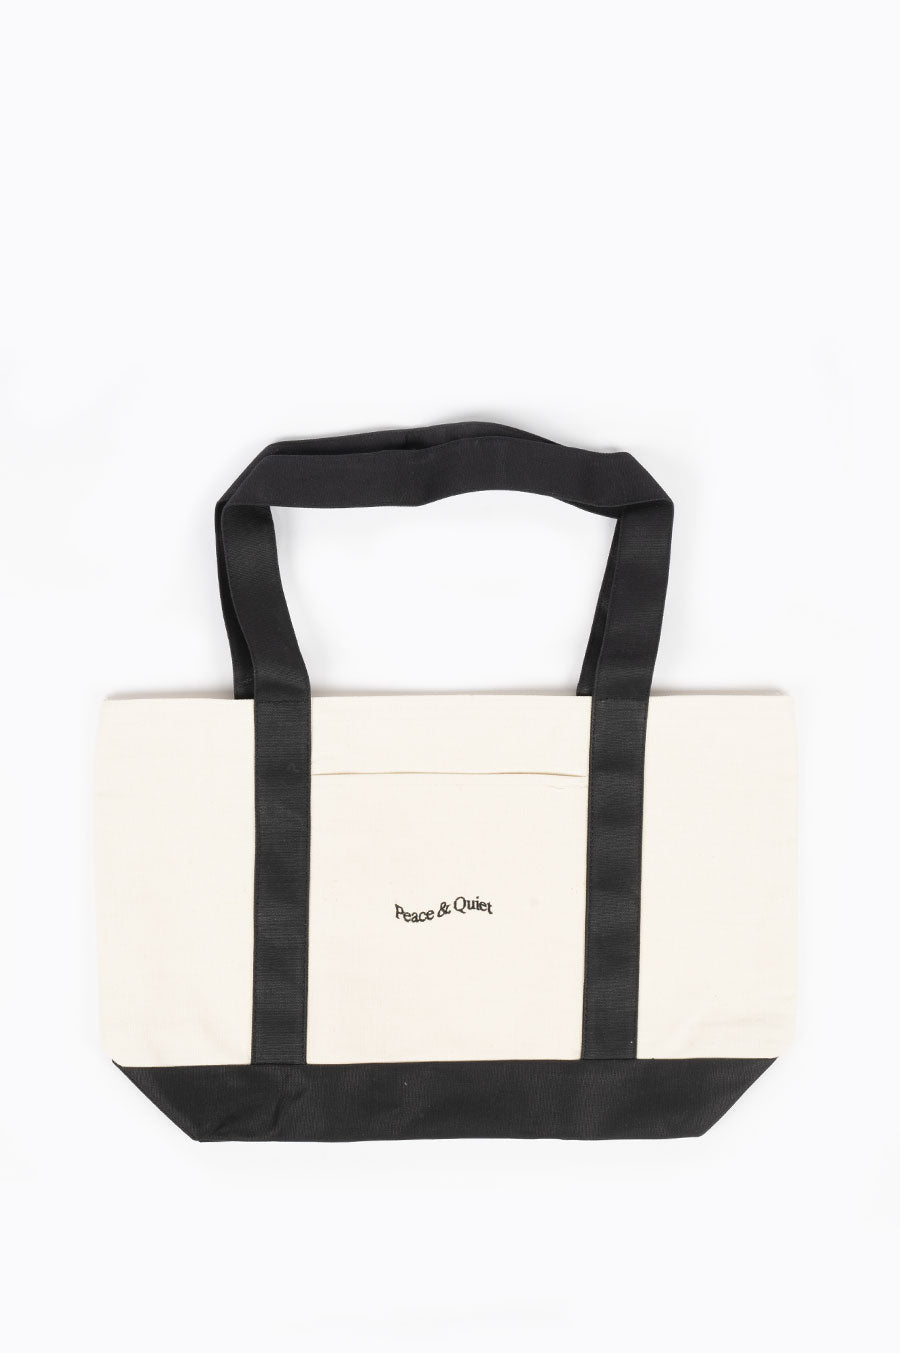 THE MUSEUM OF PEACE AND QUIET WORDMARK TOTE BAG BLACK – BLENDS